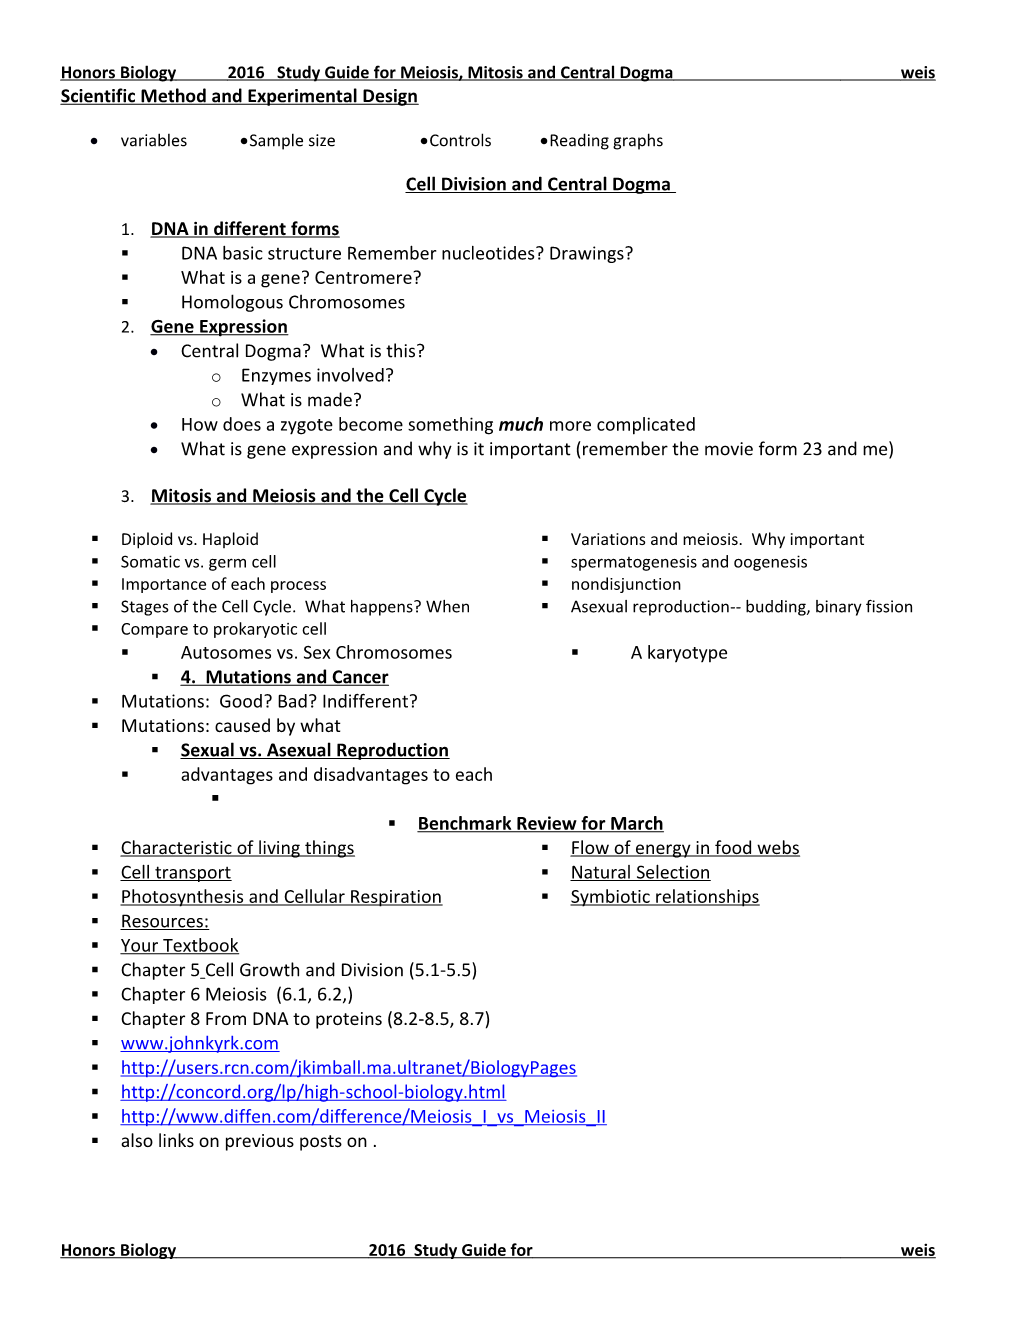 Honors Biology2016 Study Guide for Meiosis, Mitosis and Central Dogma Weis